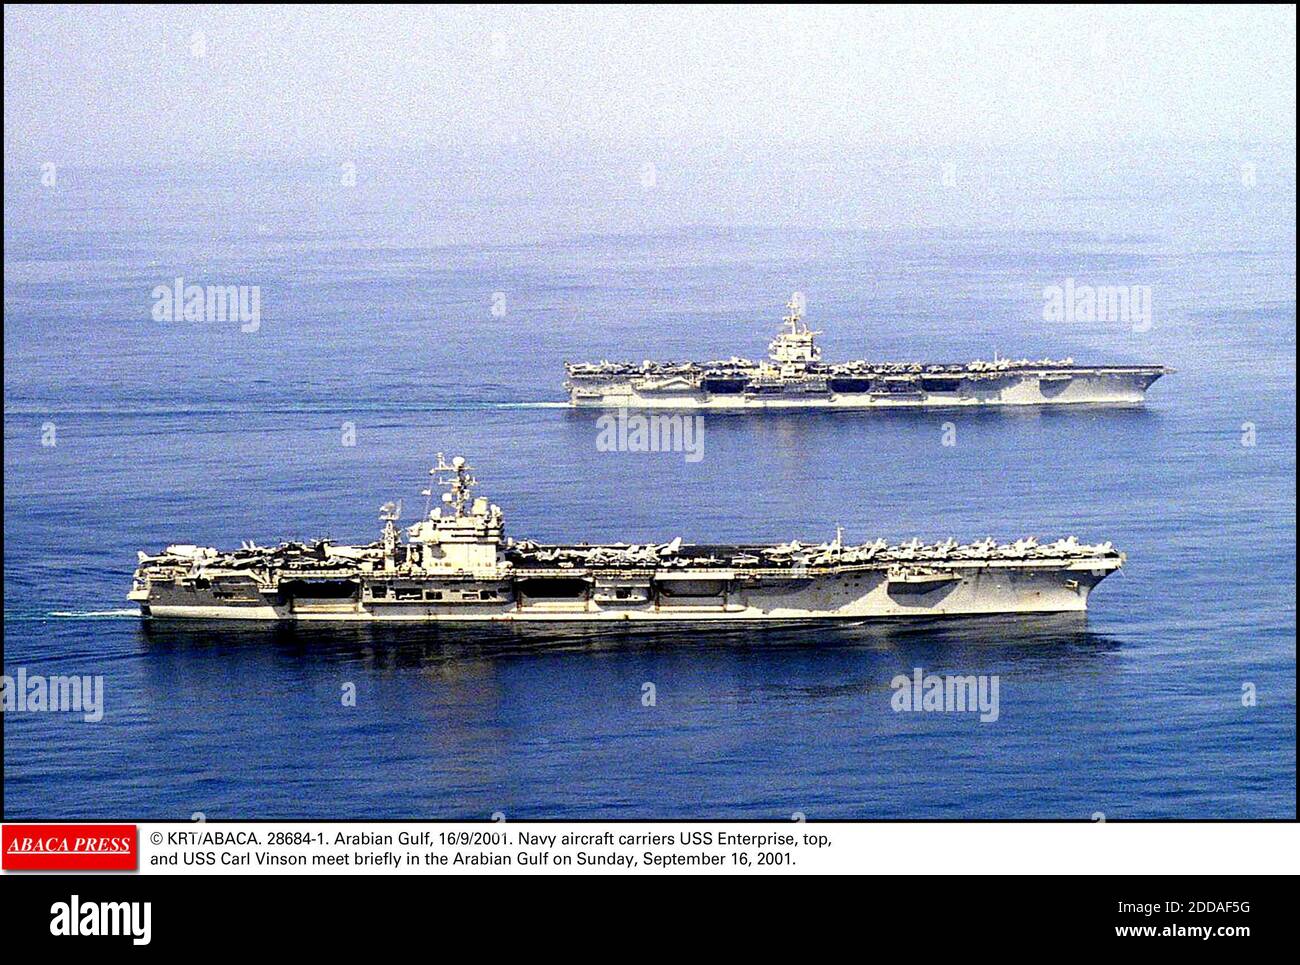 NO FILM, NO VIDEO, NO TV, NO DOCUMENTARY - © KRT/ABACA. 28684-1. Arabian Gulf, 16/9/2001. Navy aircraft carriers USS Enterprise, top, and USS Carl Vinson meet briefly in the Arabian Gulf on Sunday, September 16, 2001. Stock Photo